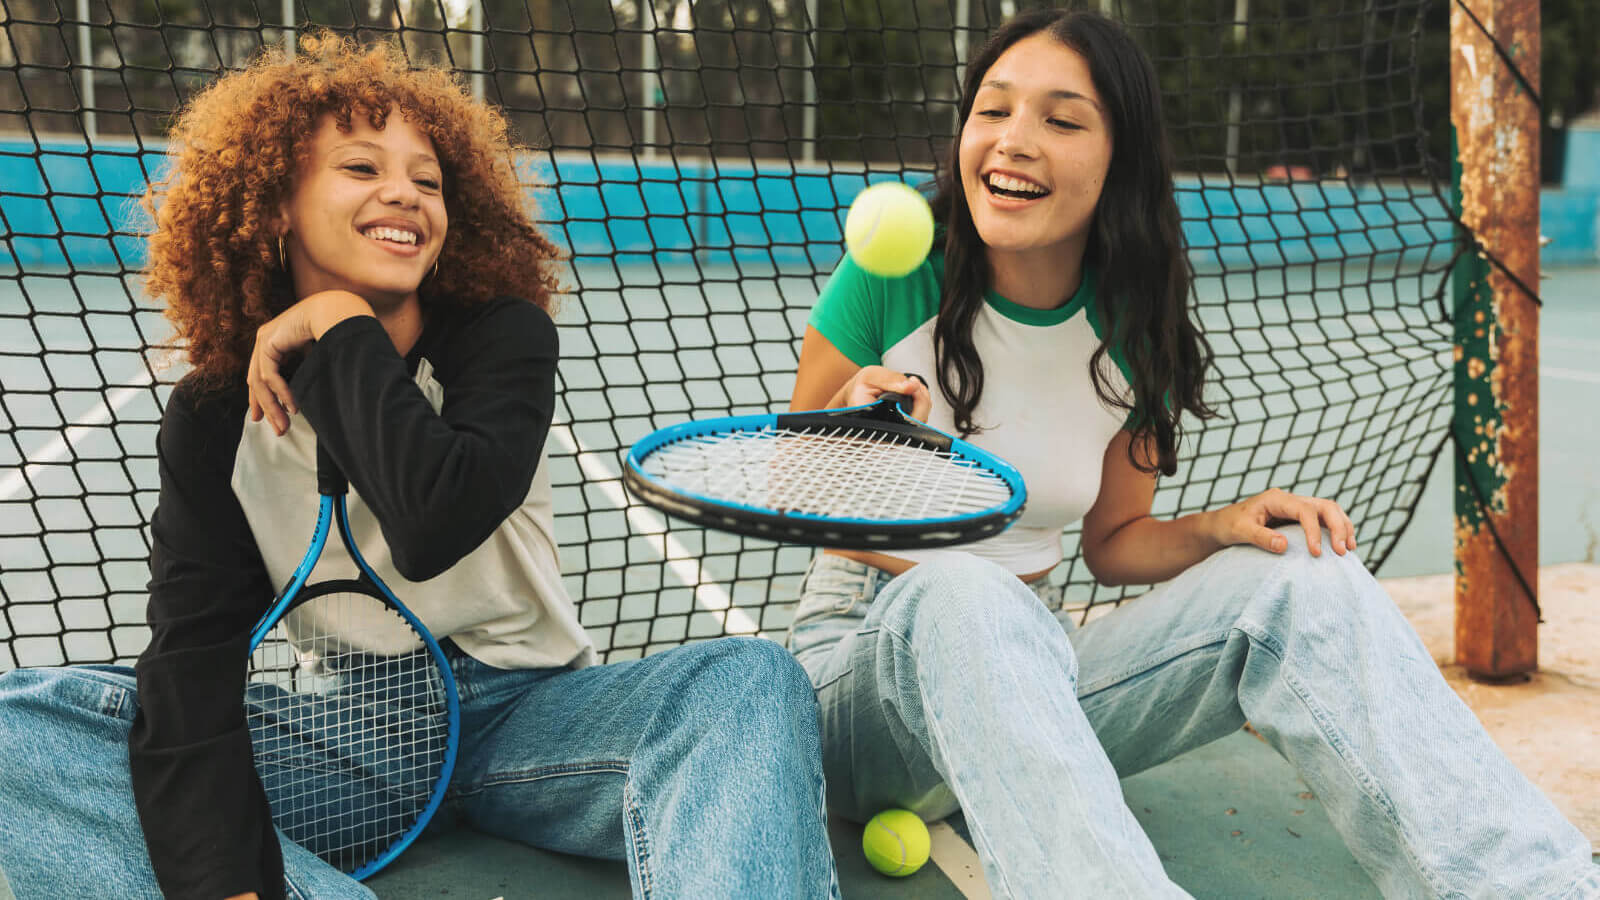 two girls laugh as they wait to play tennis